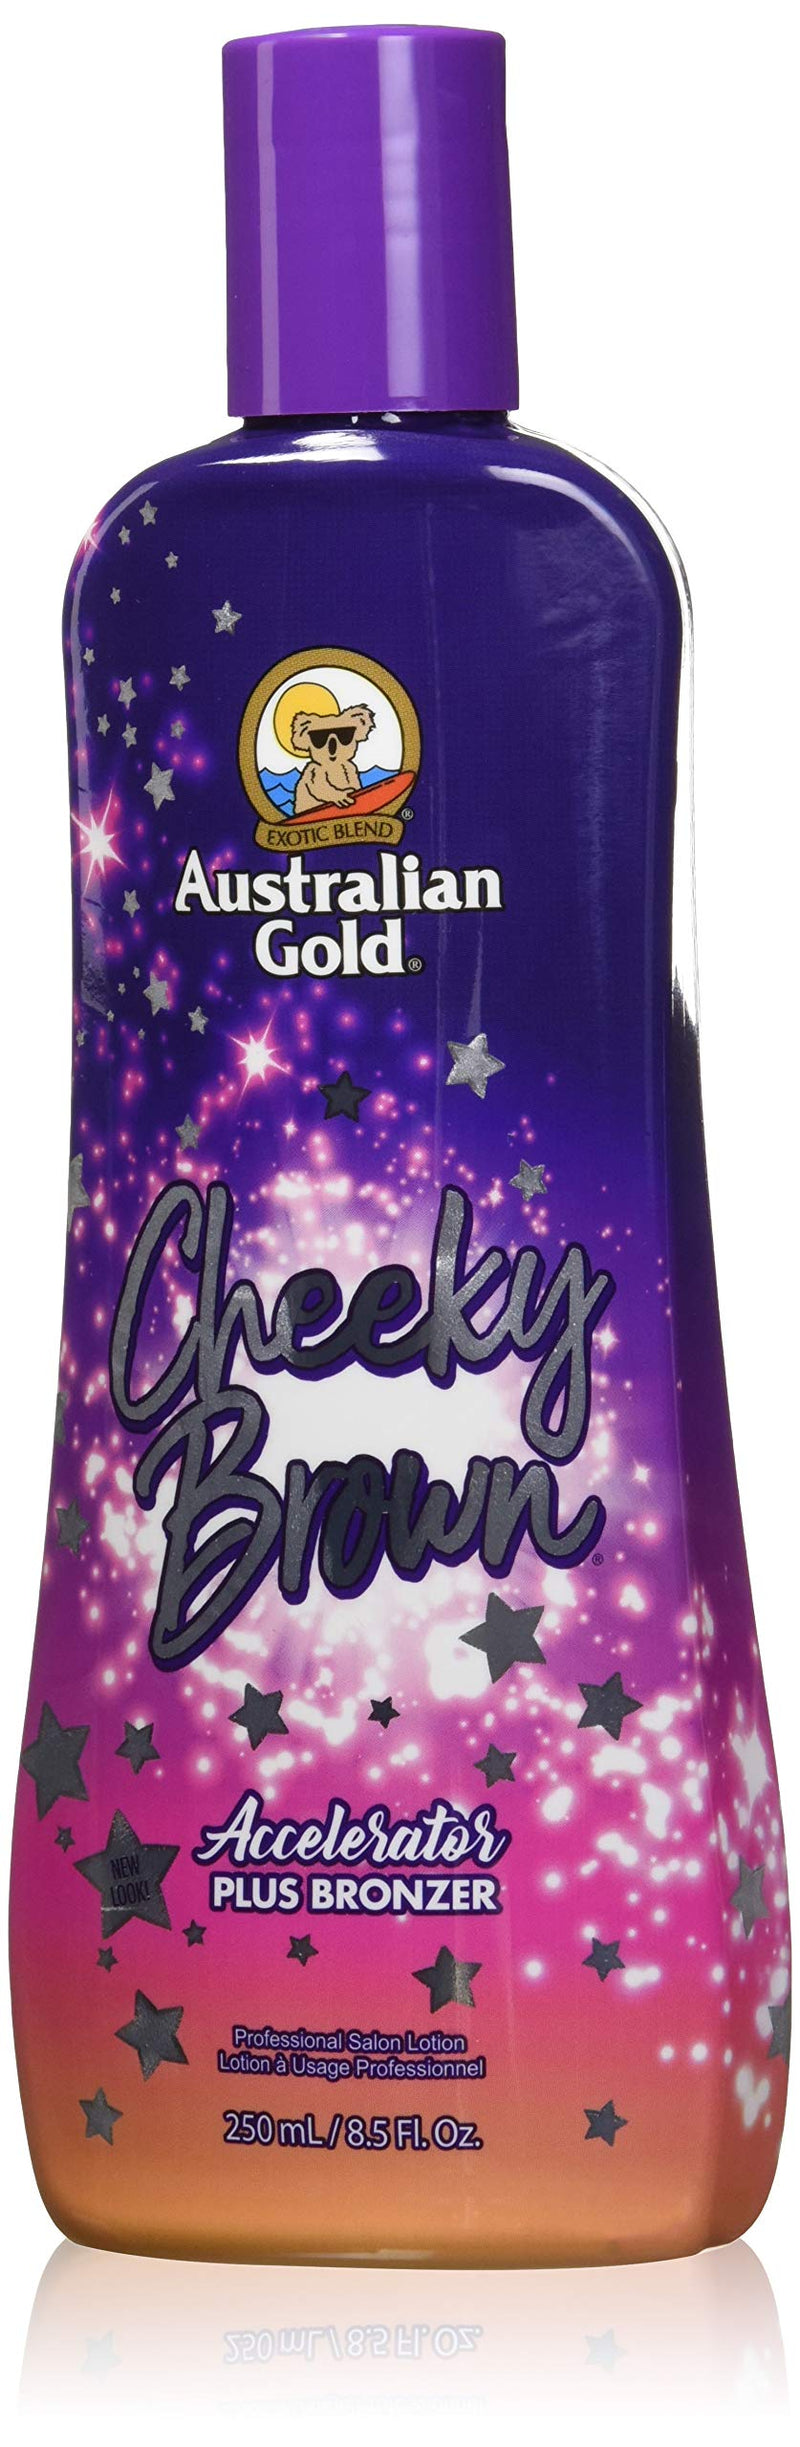 Australian Gold Cheeky Brown Tanning Lotion Australian Gold Dark Tanning Accelerator Plus Bronze 240 ml by Australian Gold - BeesActive Australia